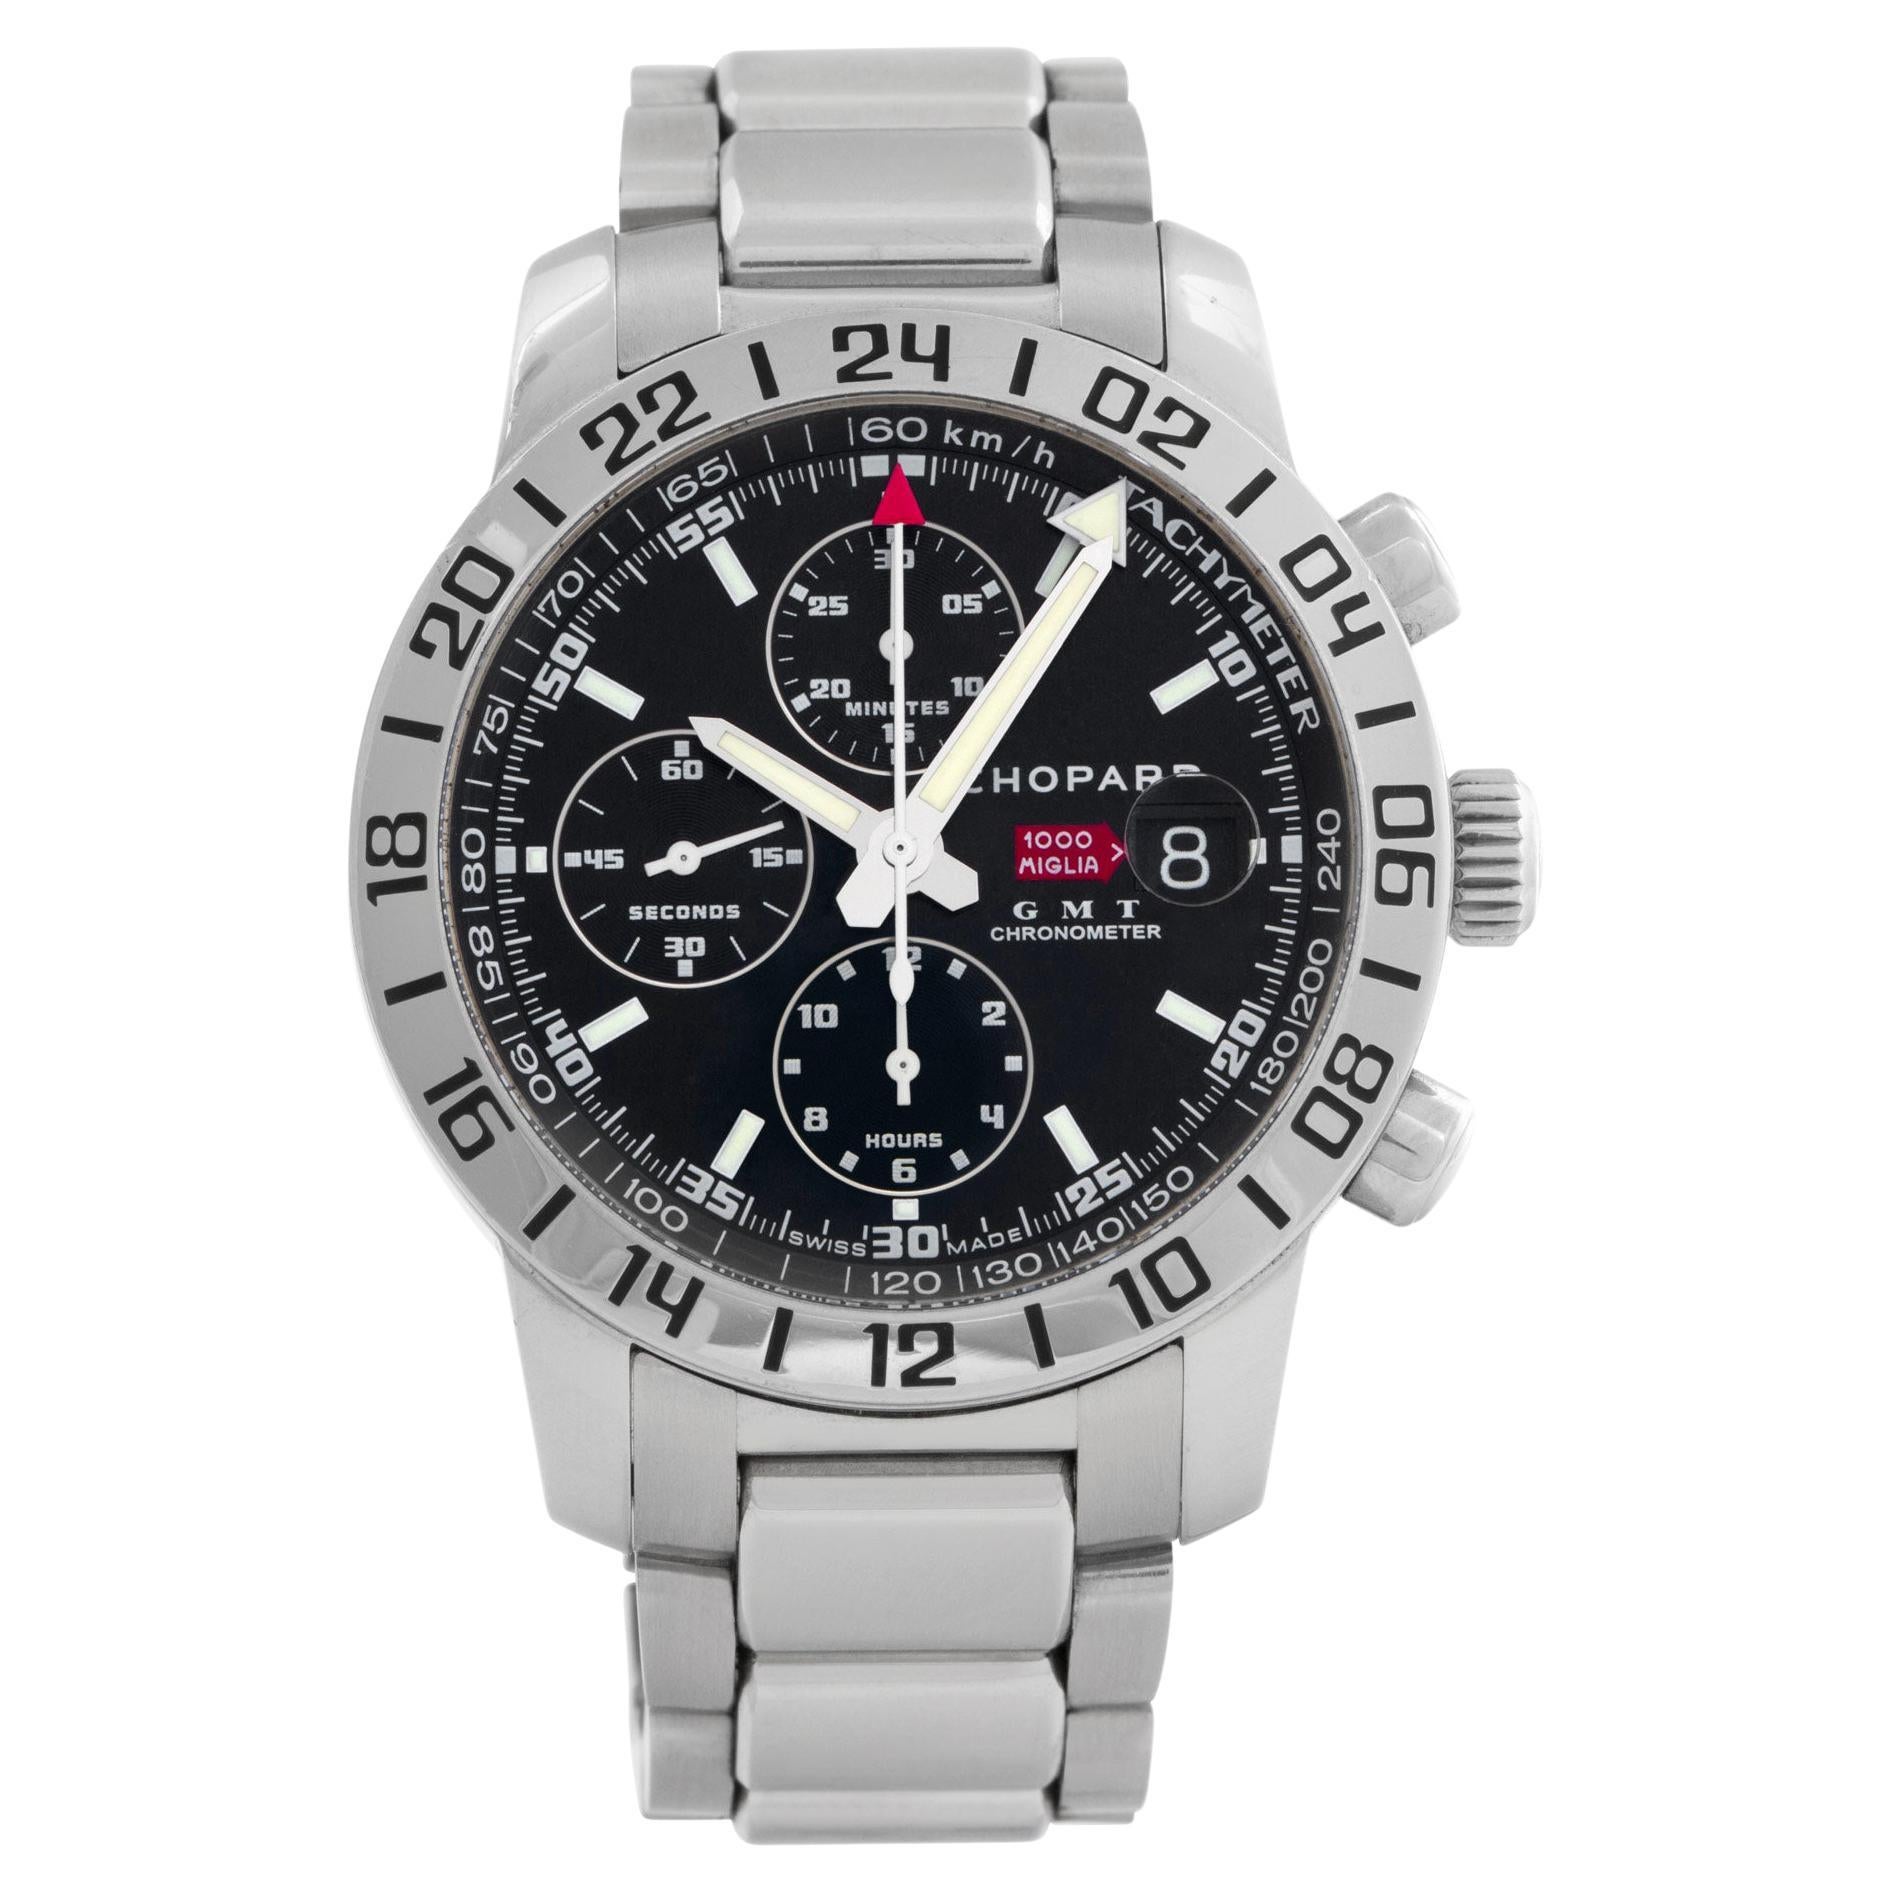 Chopard Mille Miglia REF. 158992-3001 GMT Chronograph in Stainless Steel